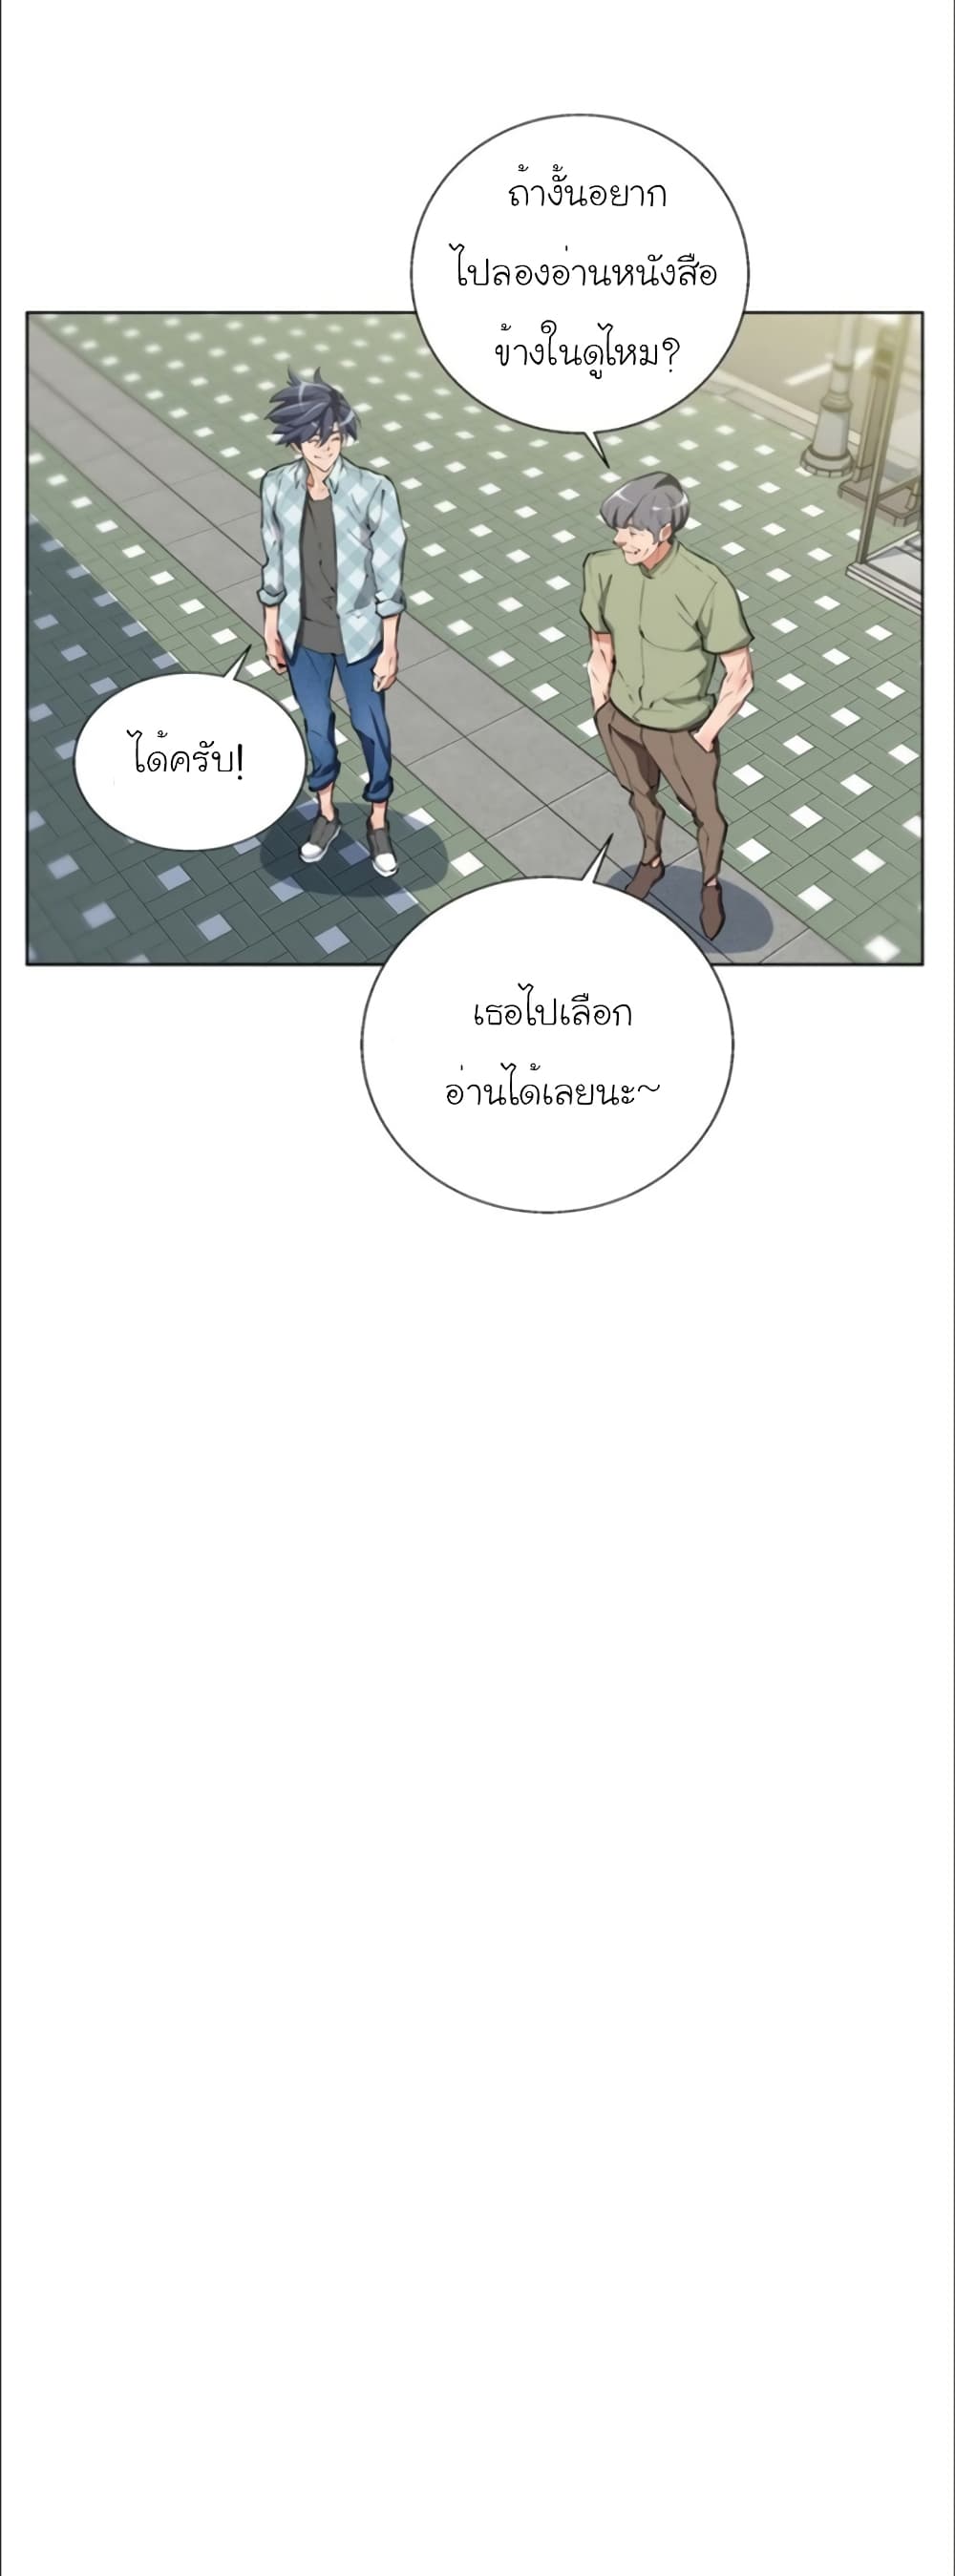 I Stack Experience Through Reading Books ตอนที่ 50 (10)